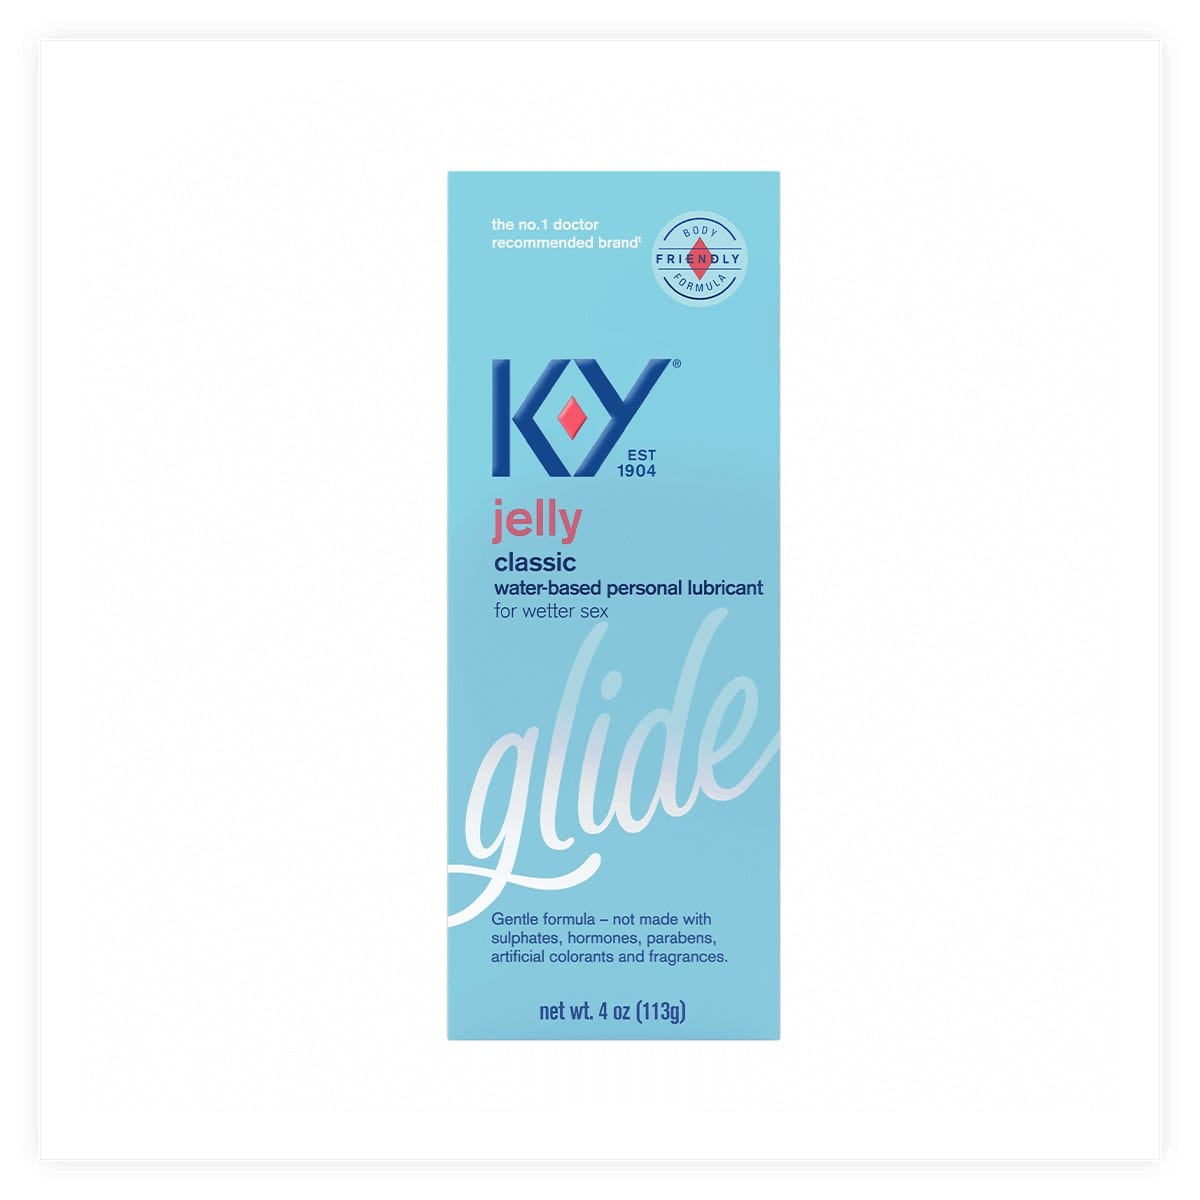 K-Y Jelly Water-Based Lubricant pic pic